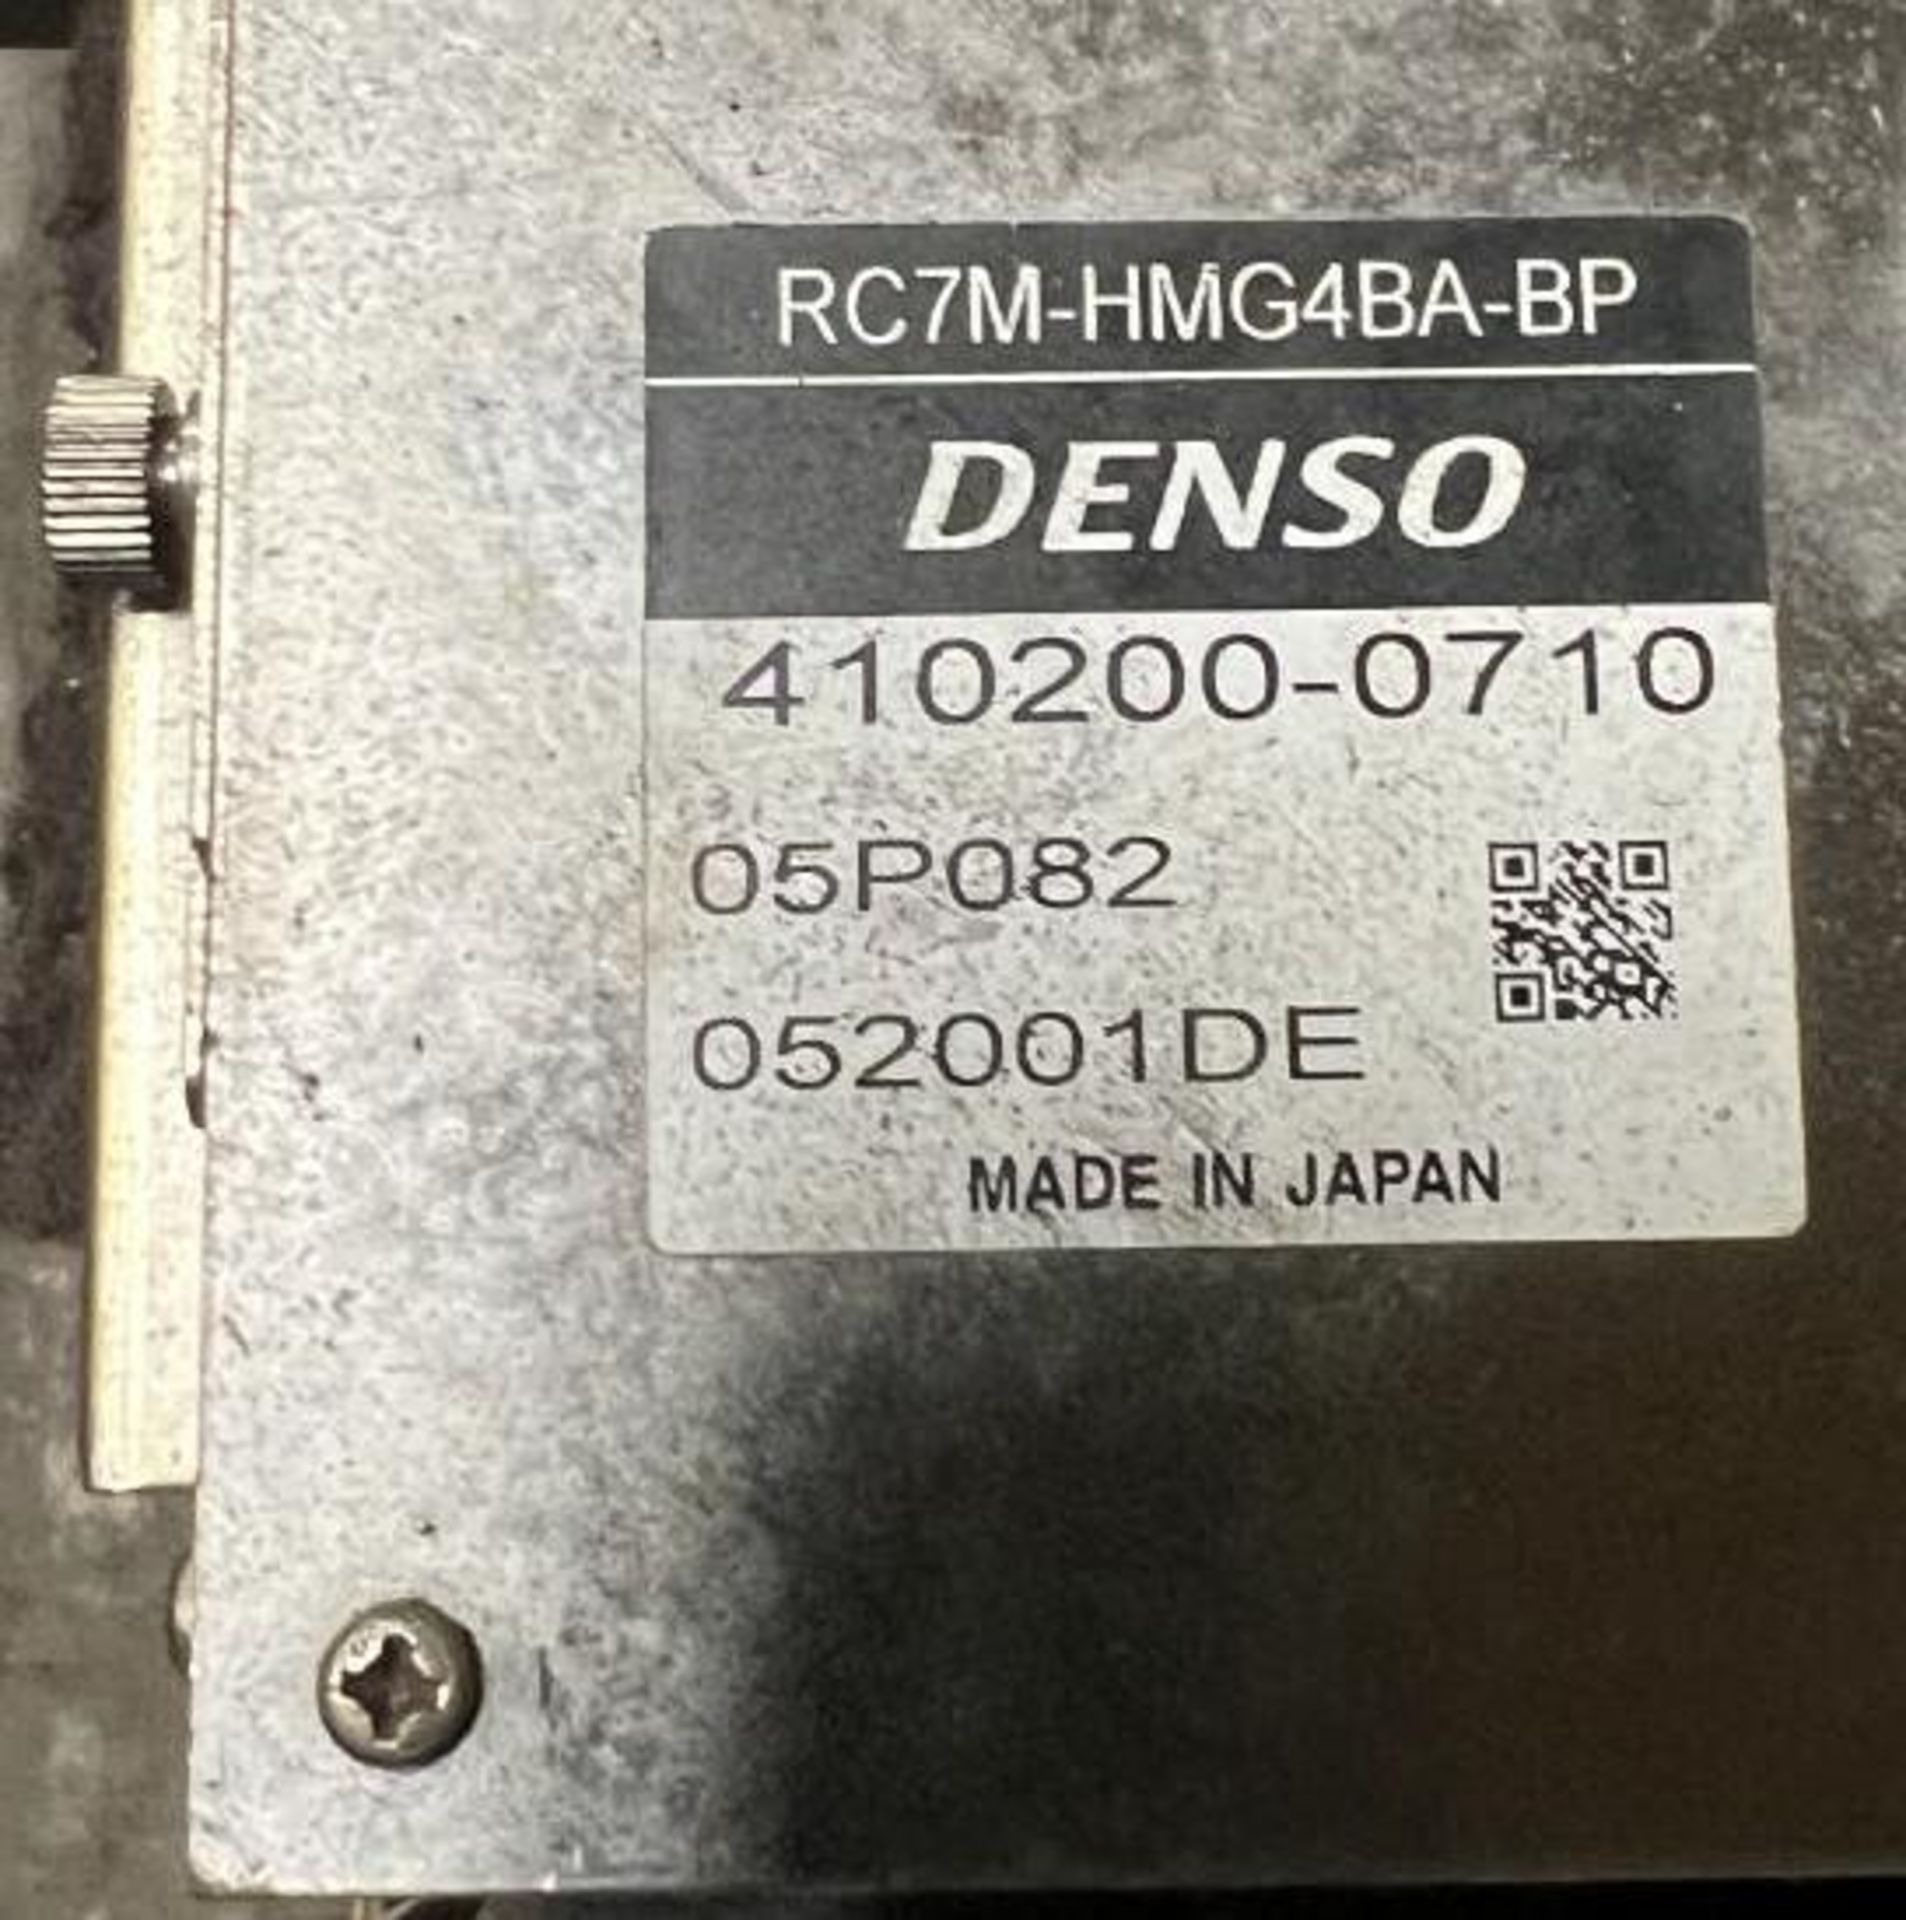 Lot of (4) Denso #RC7M-HMG4BA-BP / #410200-0710 Robot Controllers - Image 3 of 6